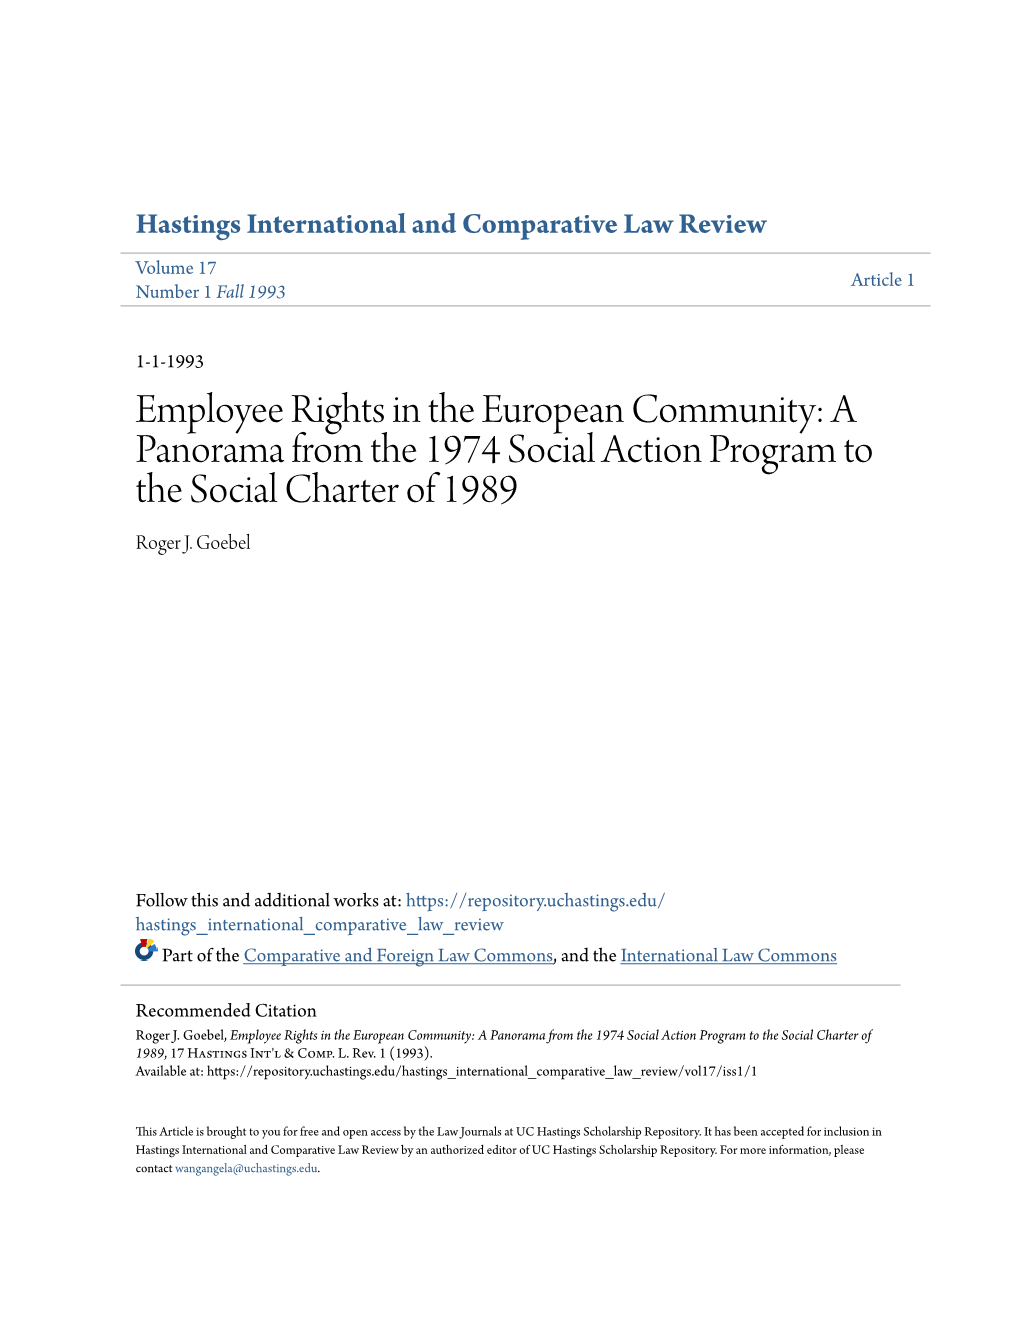 Employee Rights in the European Community: a Panorama from the 1974 Social Action Program to the Social Charter of 1989 Roger J